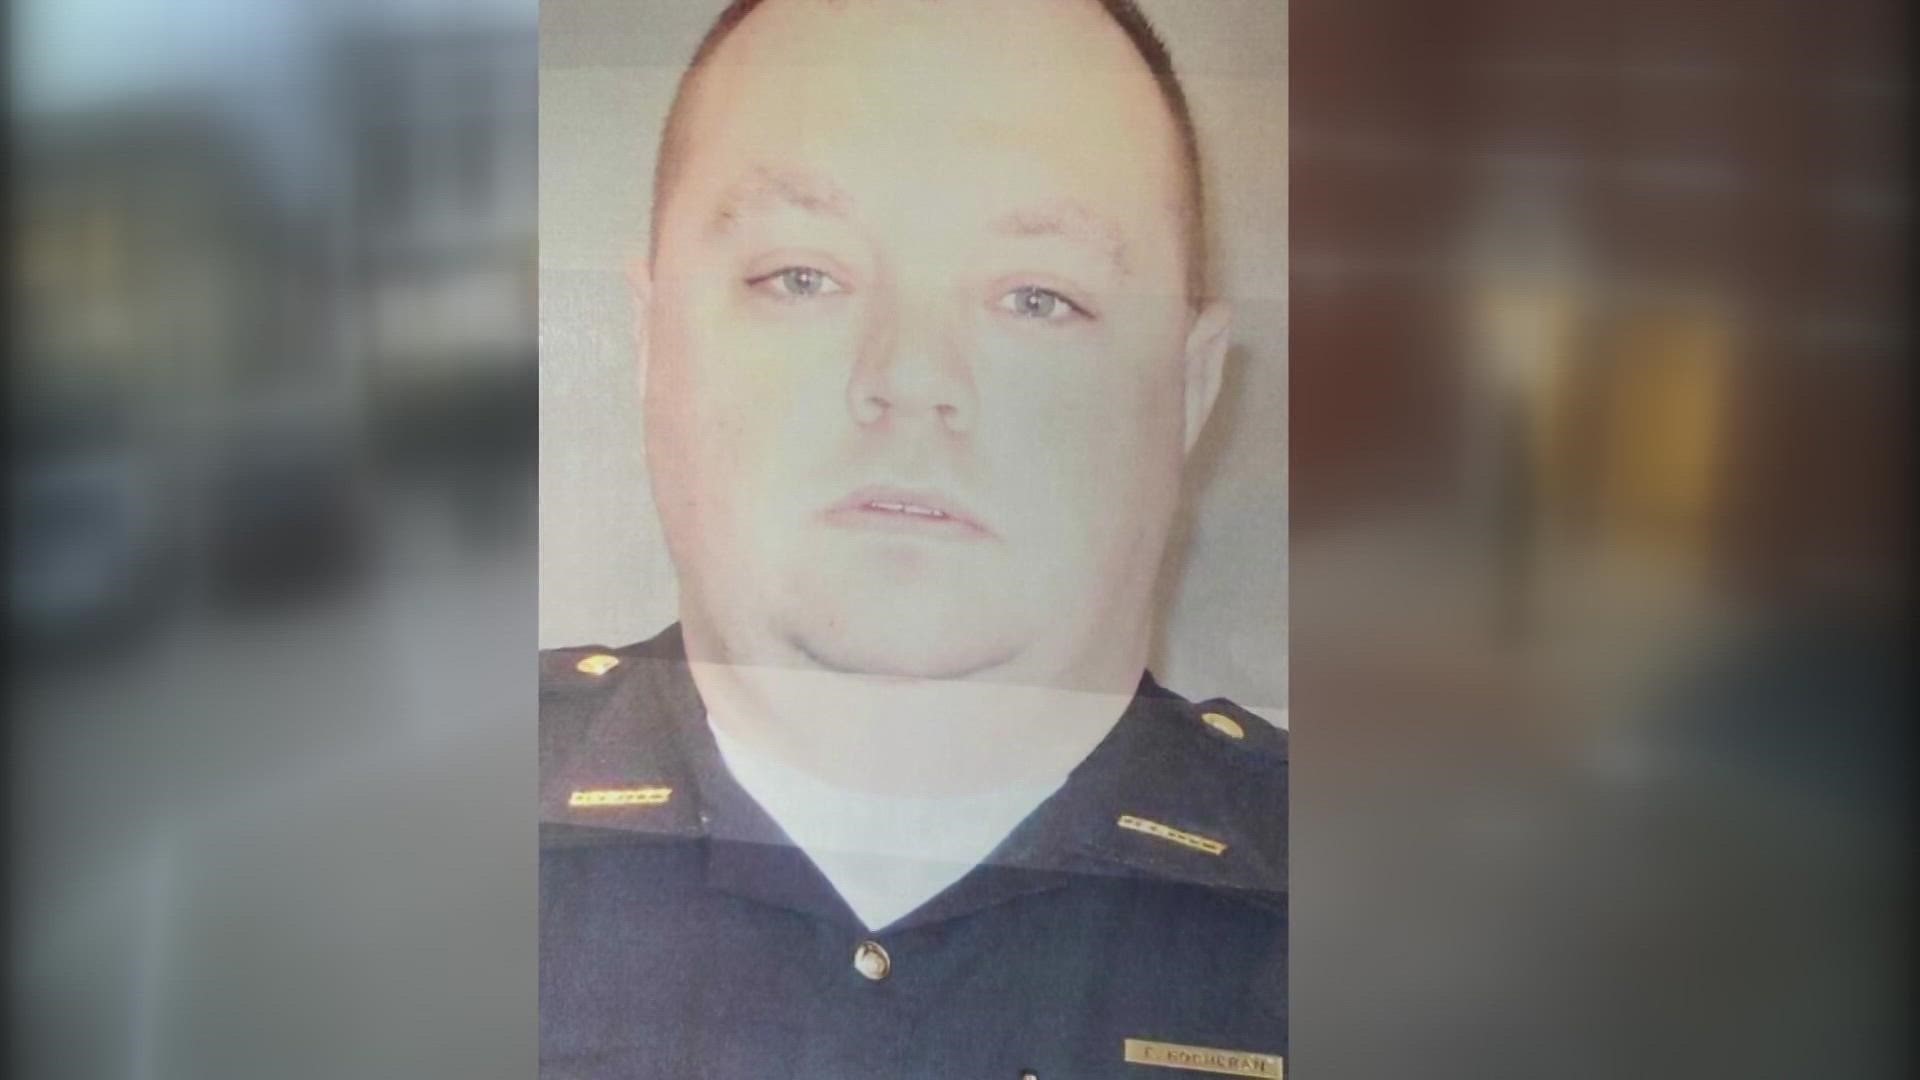 Sgt. Eric Kocheran remains hospitalized after being shot on Thursday. His Chillicothe community is keeping him in their hearts as they carry out a local tradition.